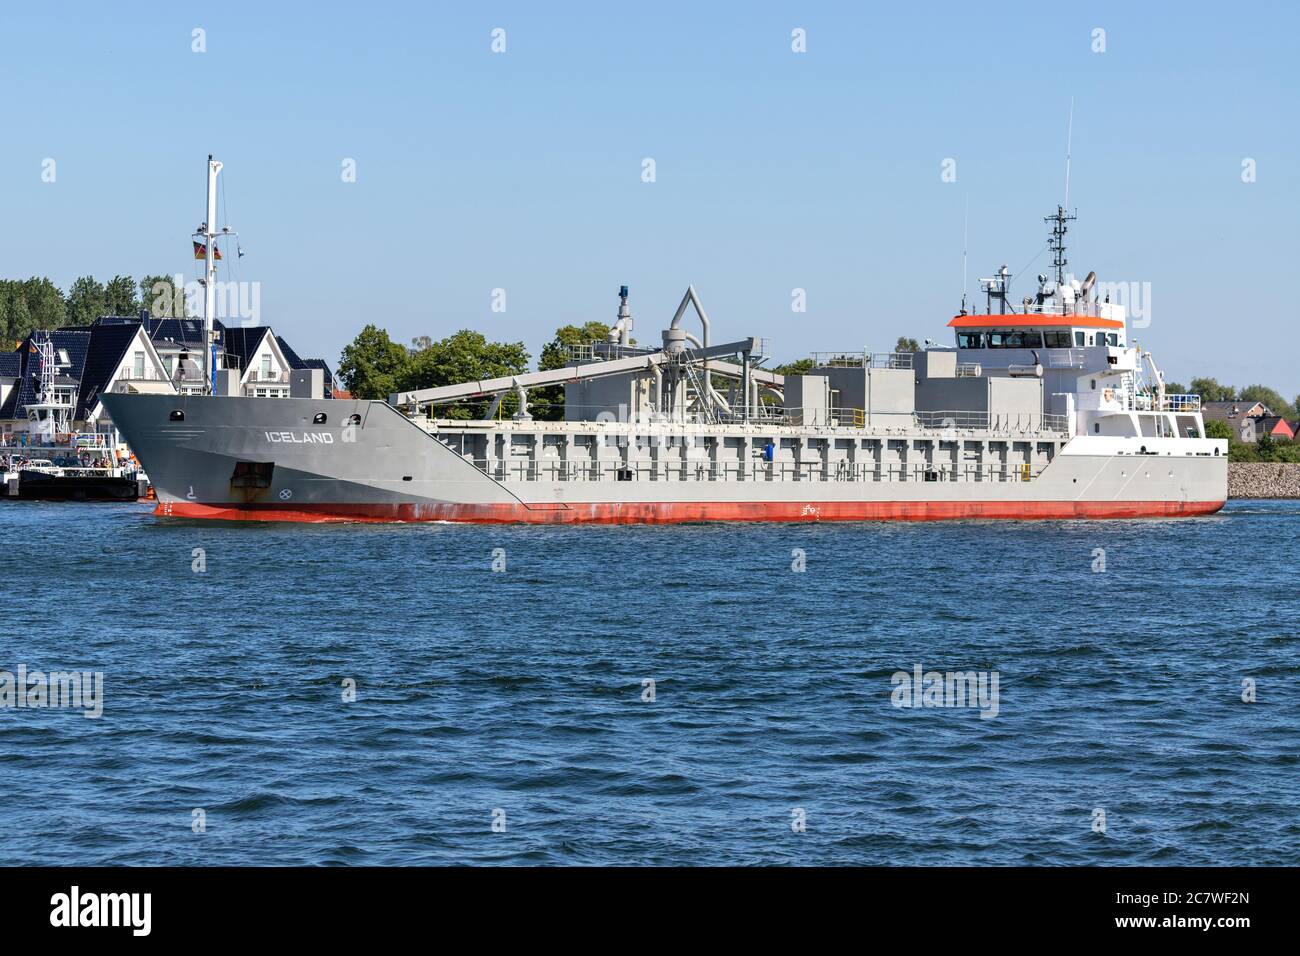 cement carrier ICELAND outbound Rostock Stock Photo